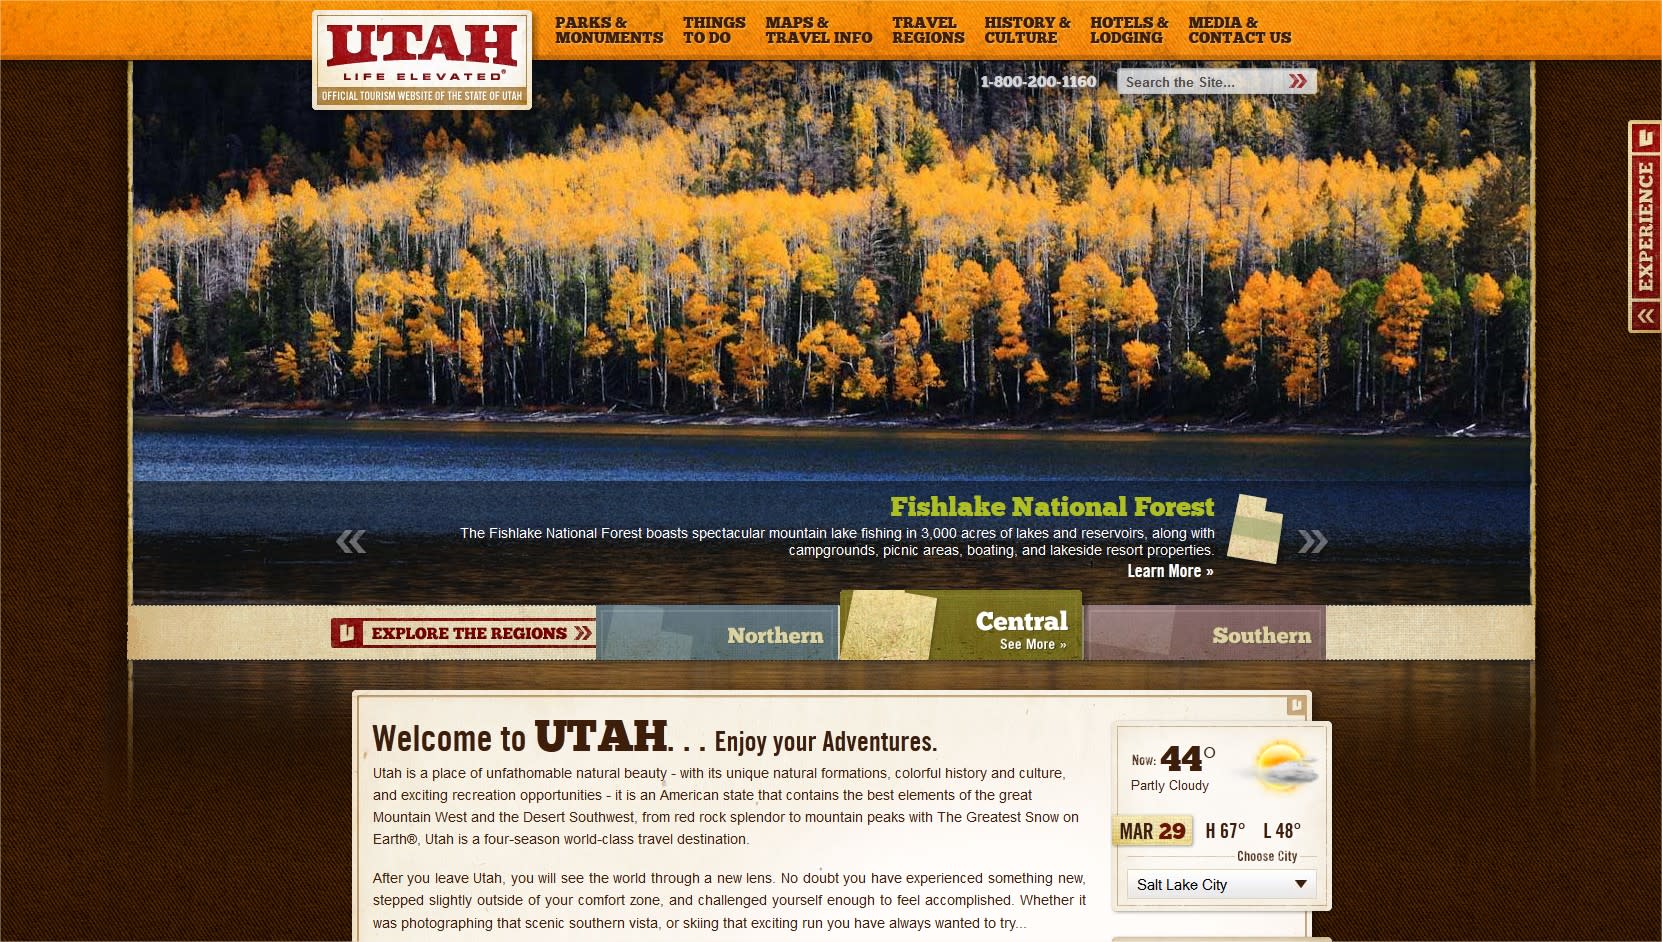 Utah Tourism Website - March 2012 - Summer Imagery